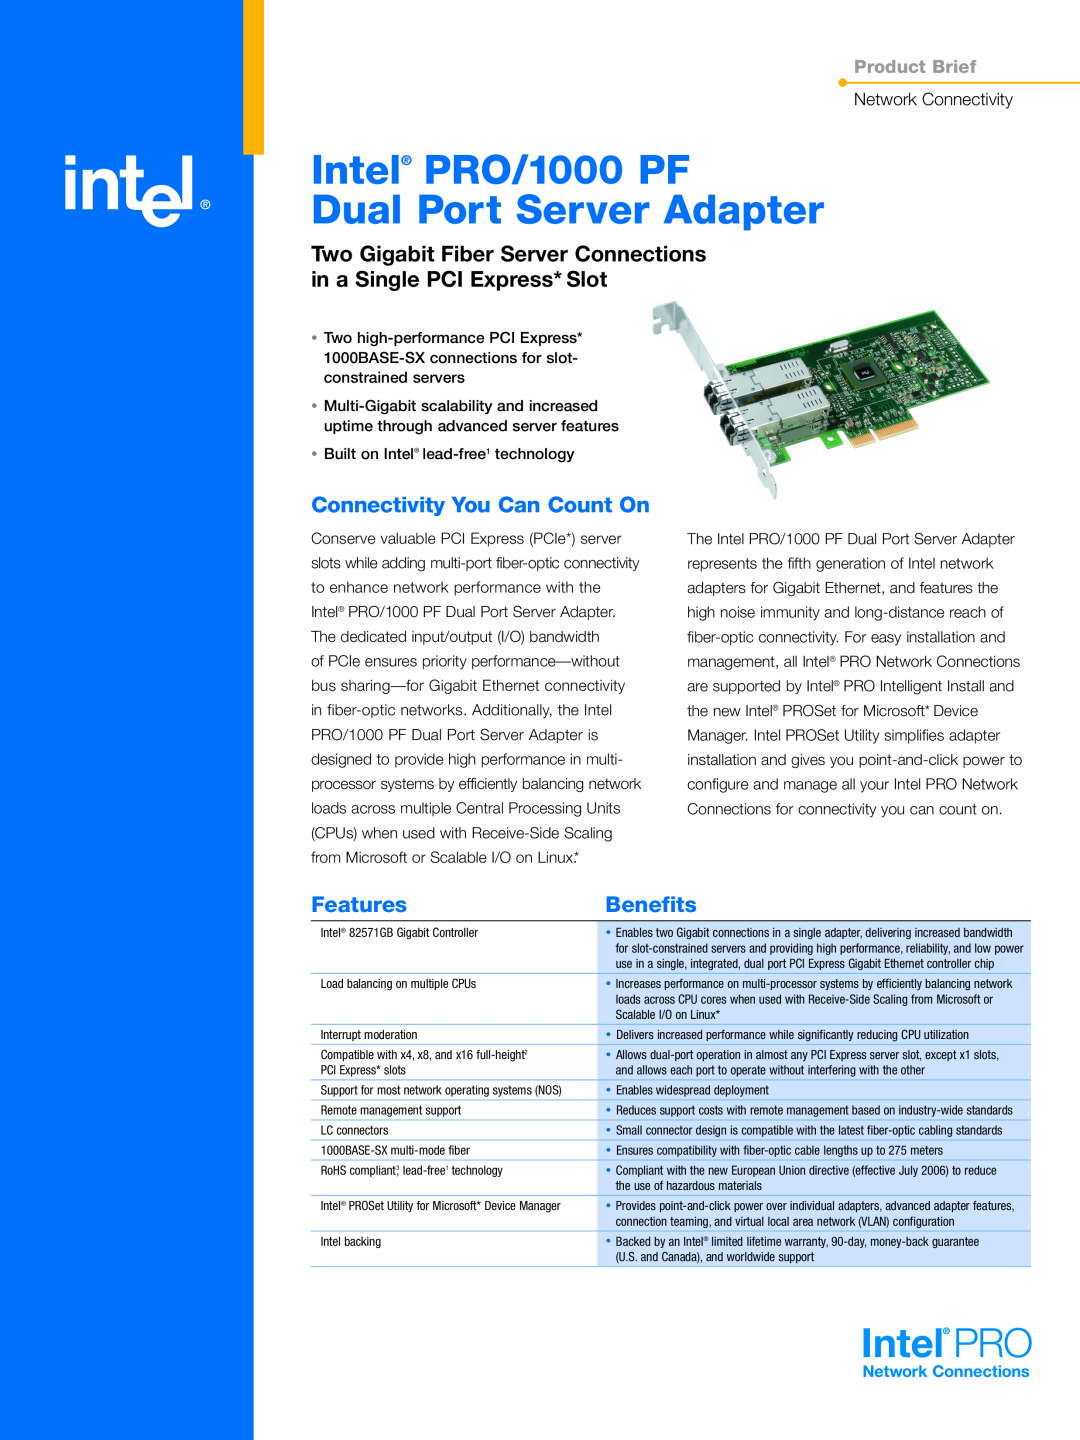 Intel warranty Connectivity You Can Count On, Features, Benefits, Intel PRO/1000 PF Dual Port Server Adapter 